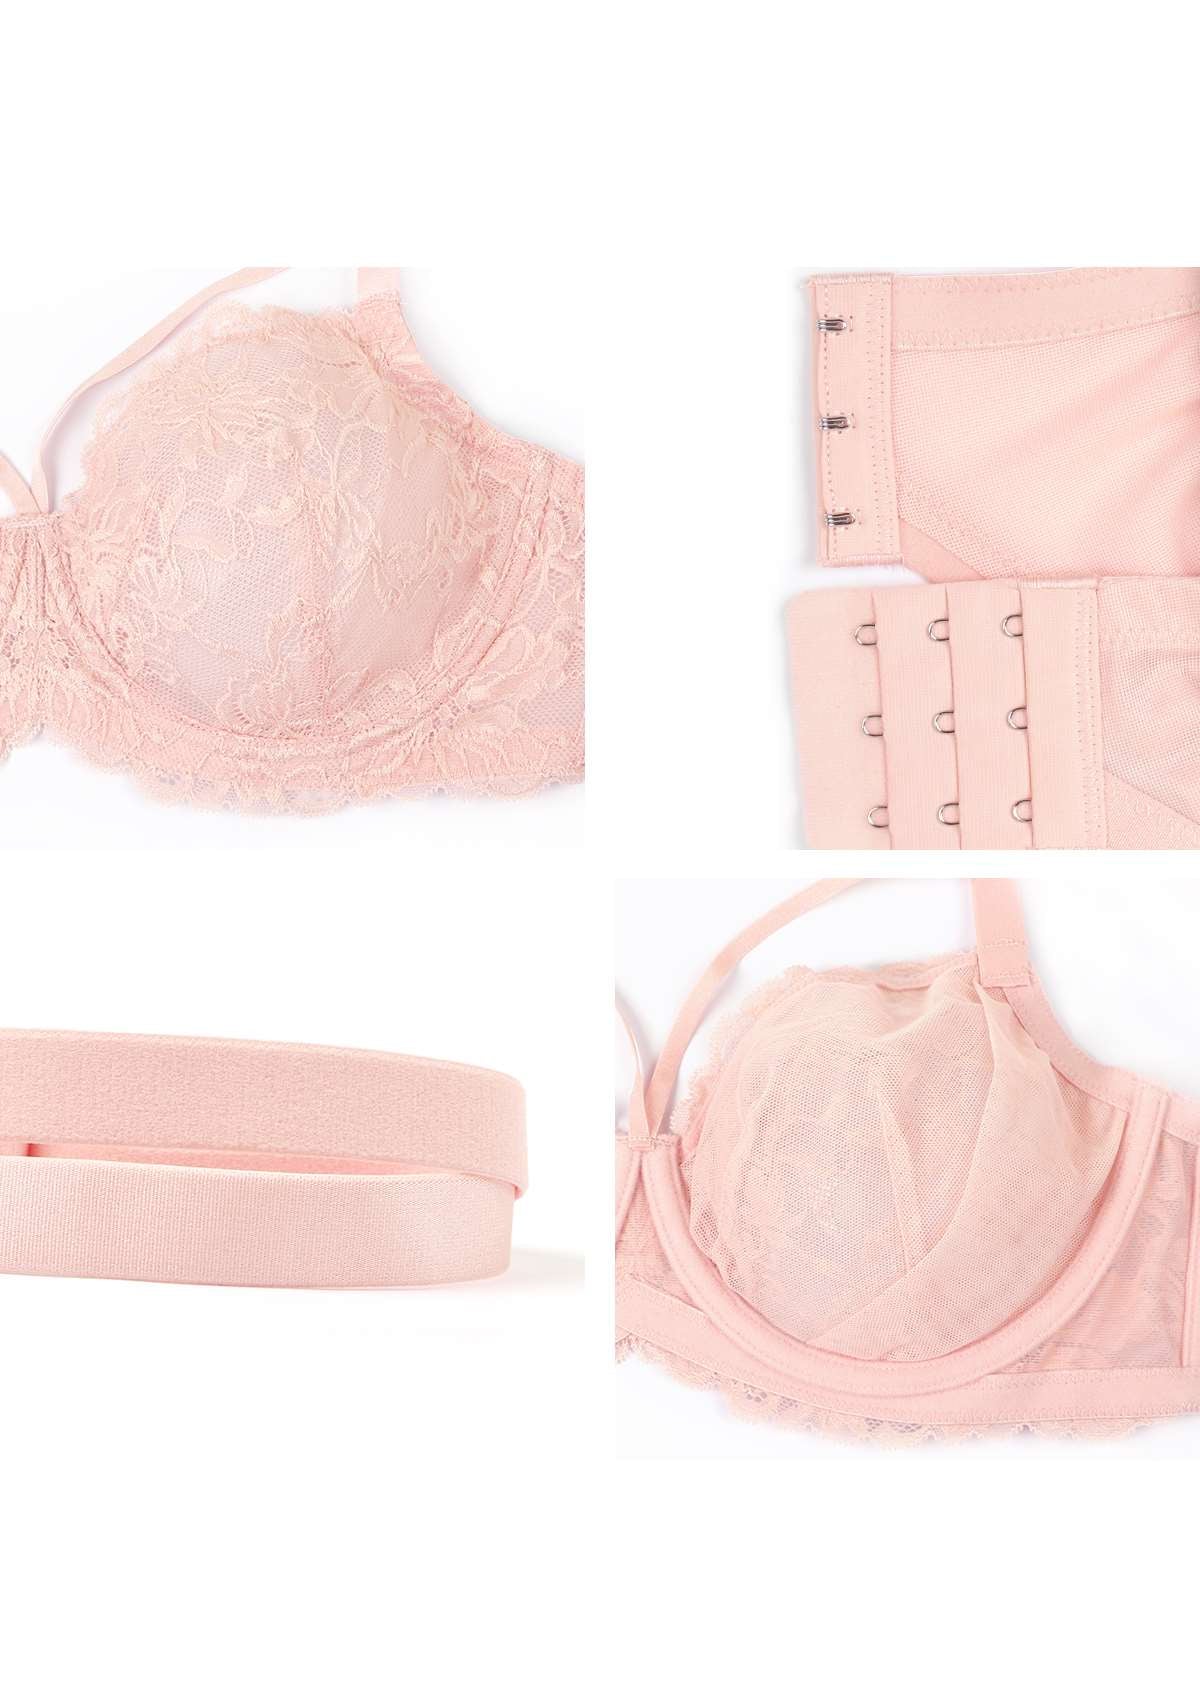 HSIA Pretty In Petals: Strappy Lace Sheer Bra For Side And Back Fat - Baby Pink / 34 / DDD/F